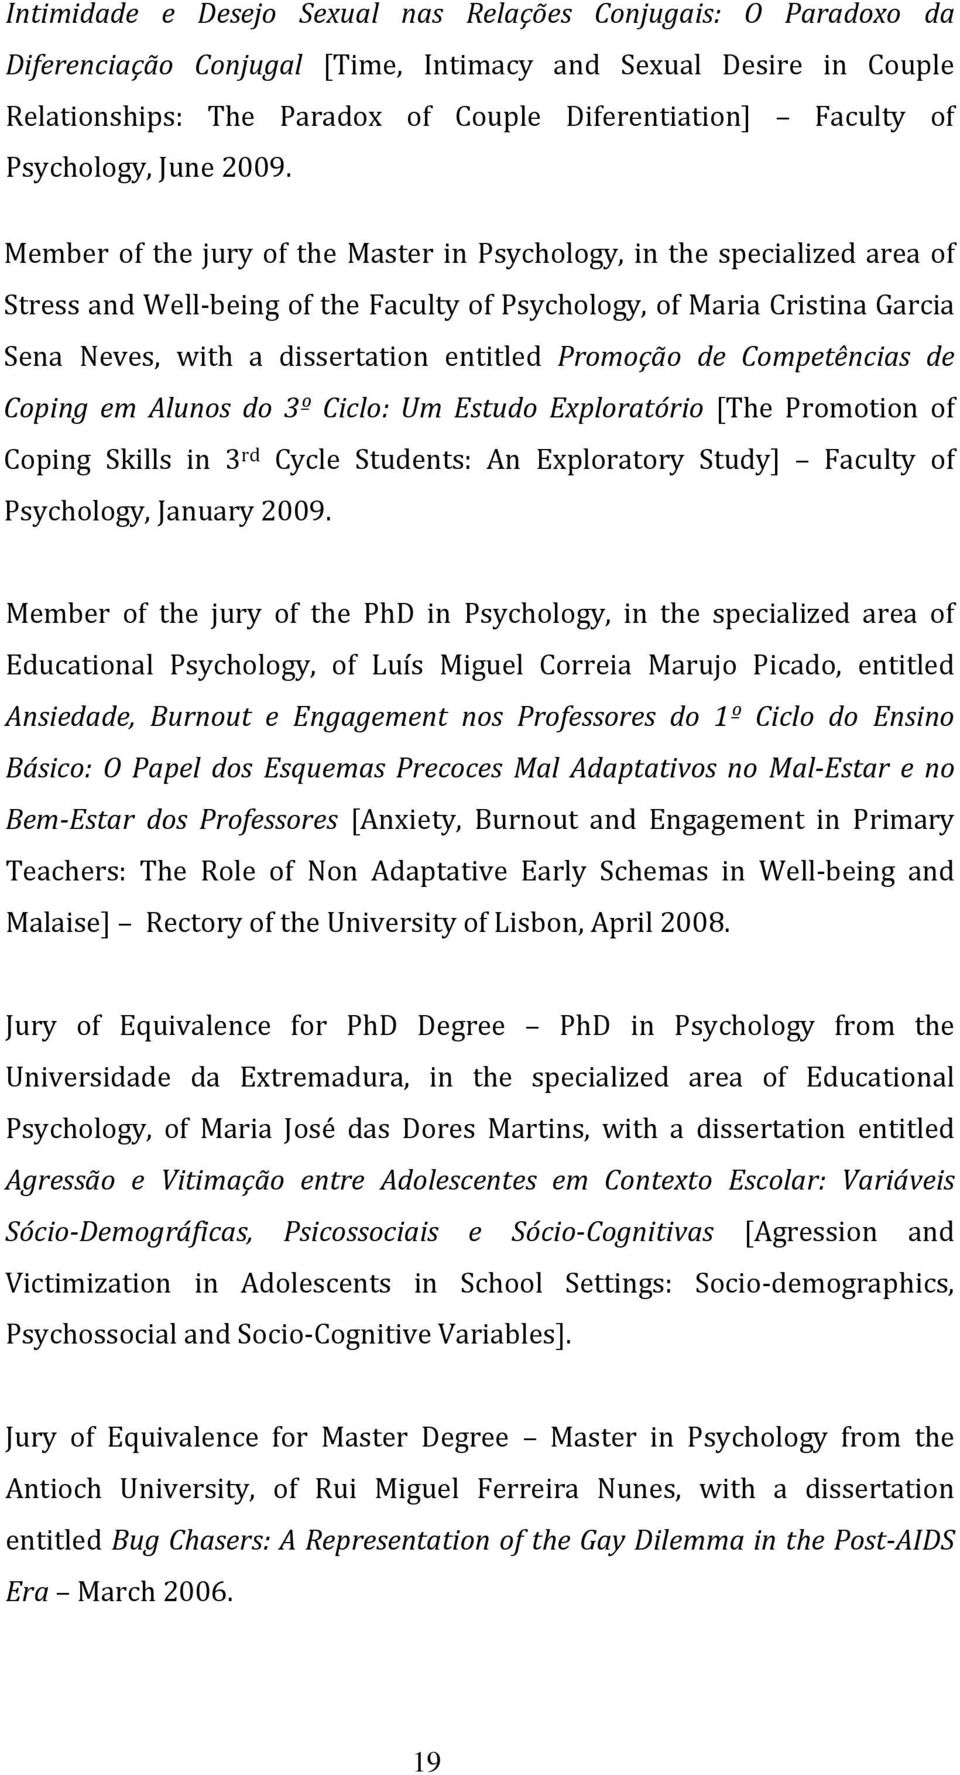 Member of the jury of the Master in Psychology, in the specialized area of Stress and Well-being of the Faculty of Psychology, of Maria Cristina Garcia Sena Neves, with a dissertation entitled